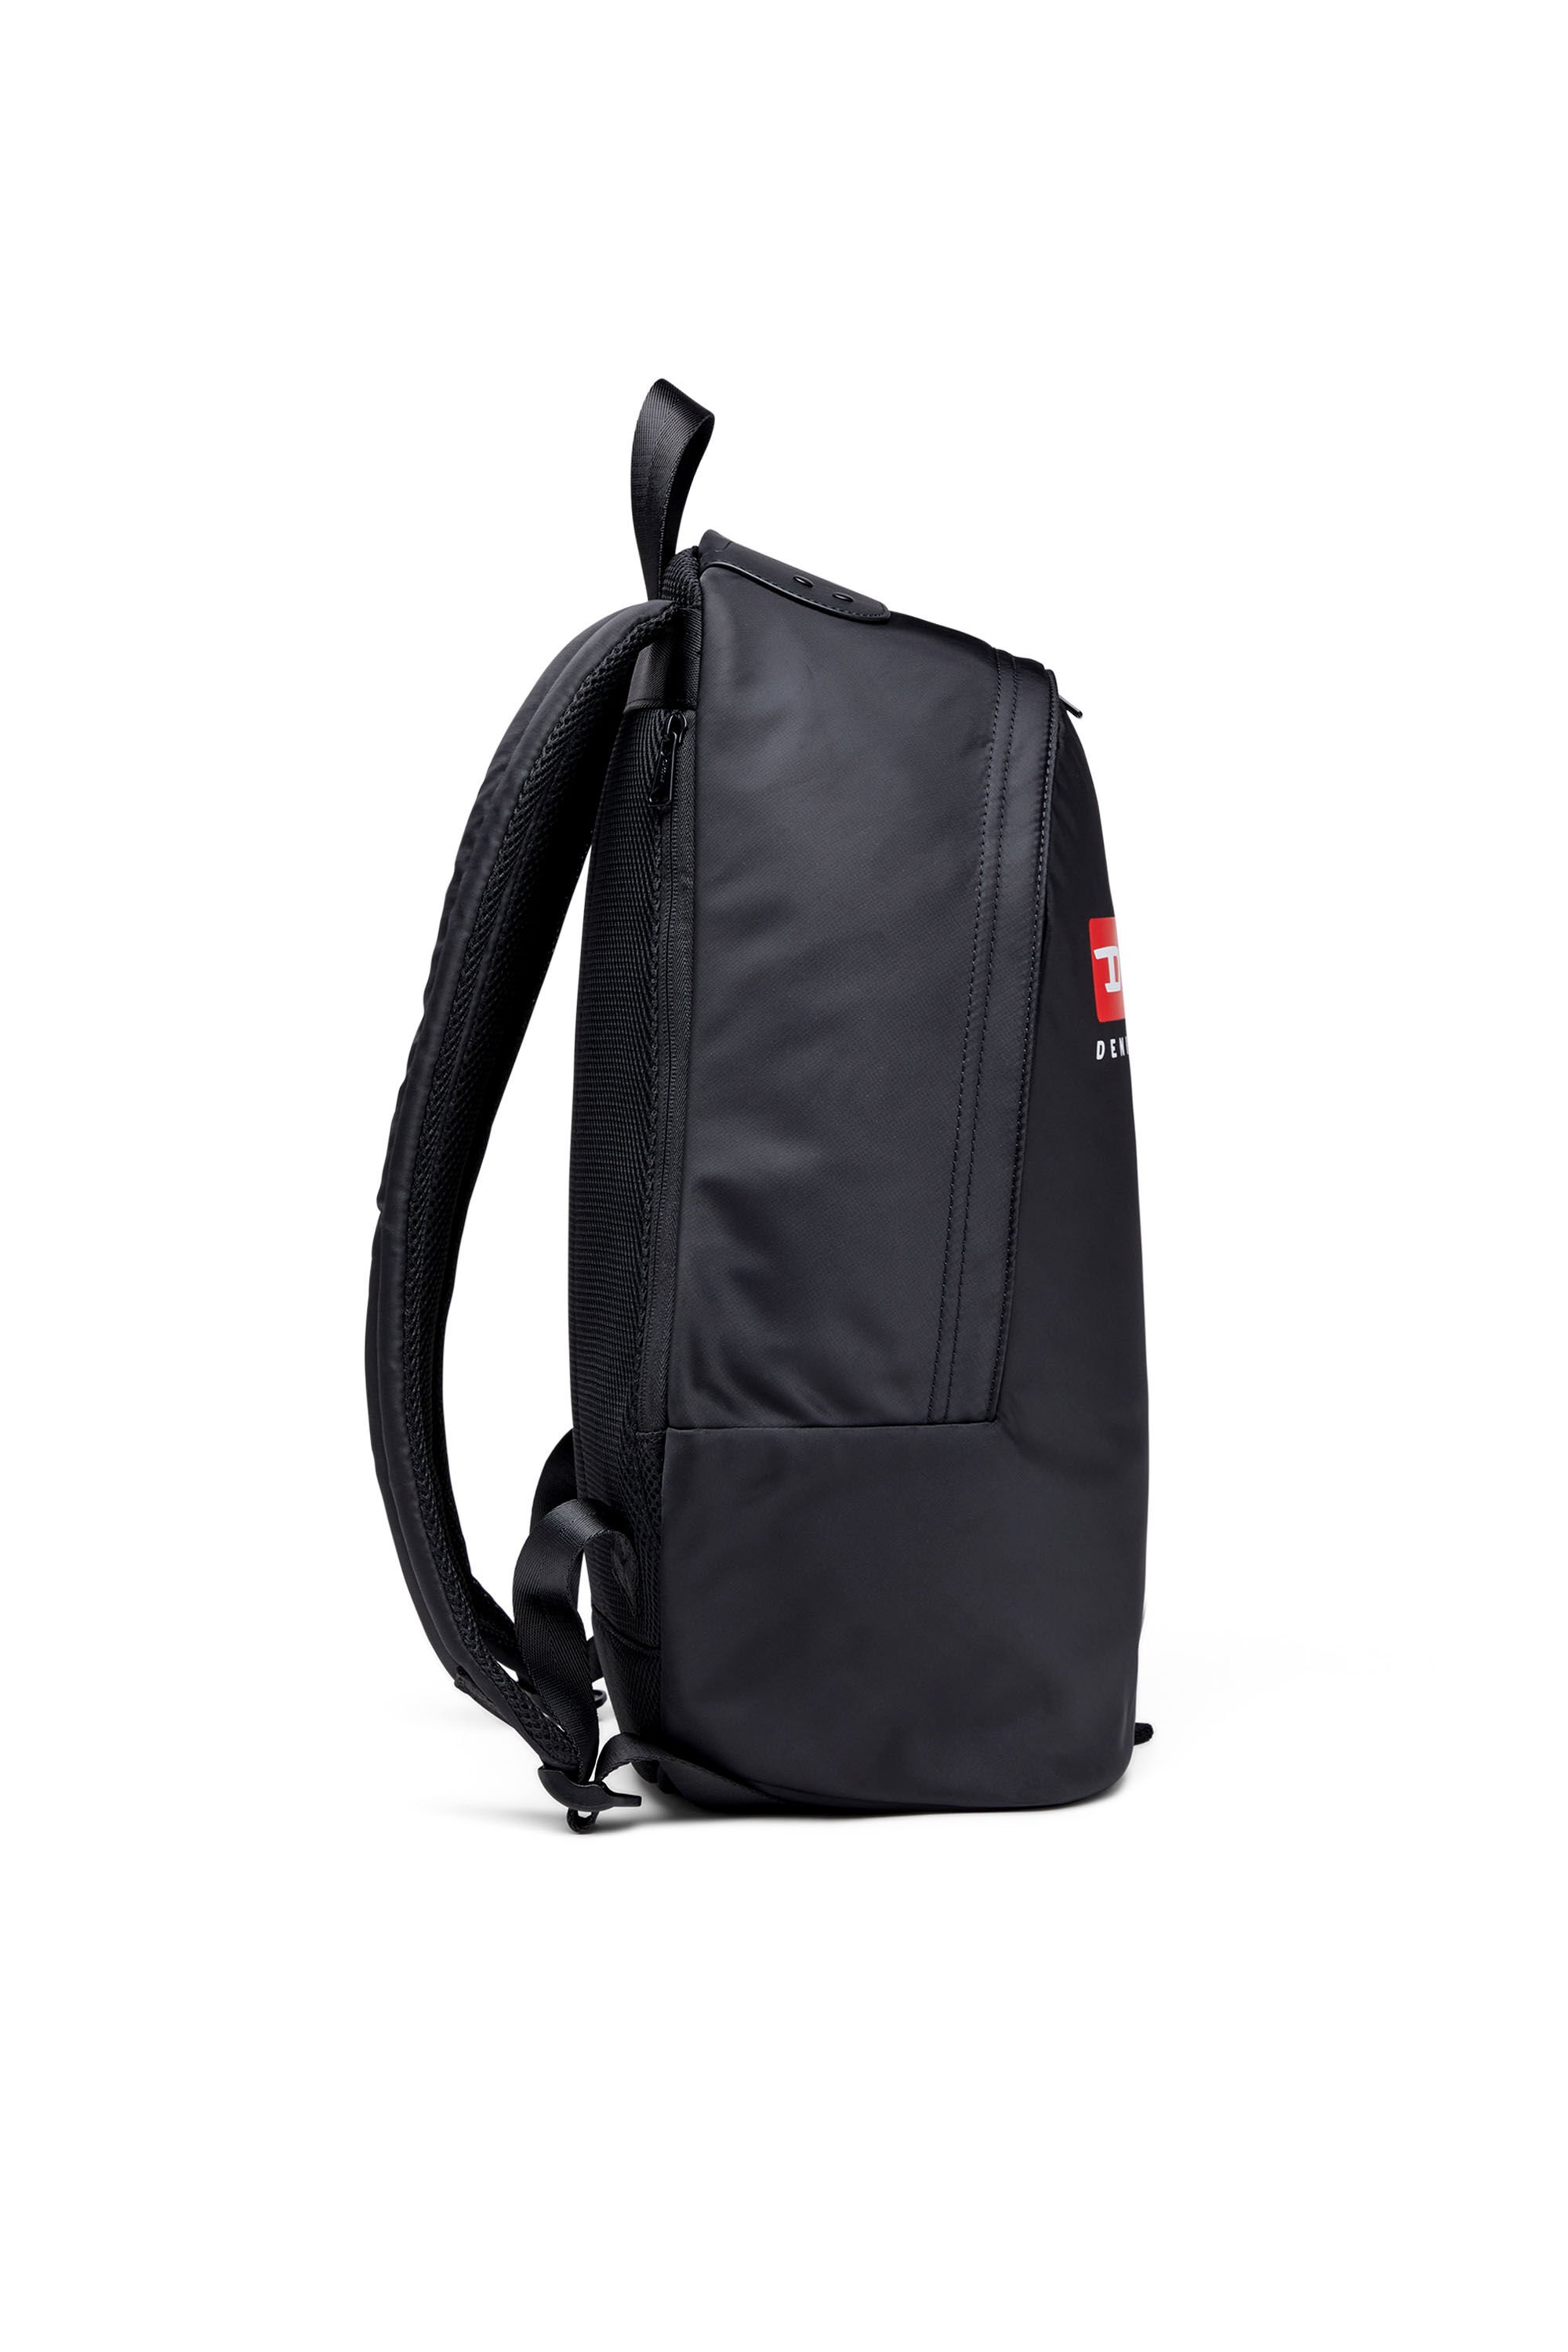 RINKE BACKPACK Man: Backpack in technical fabric with logo | Diesel